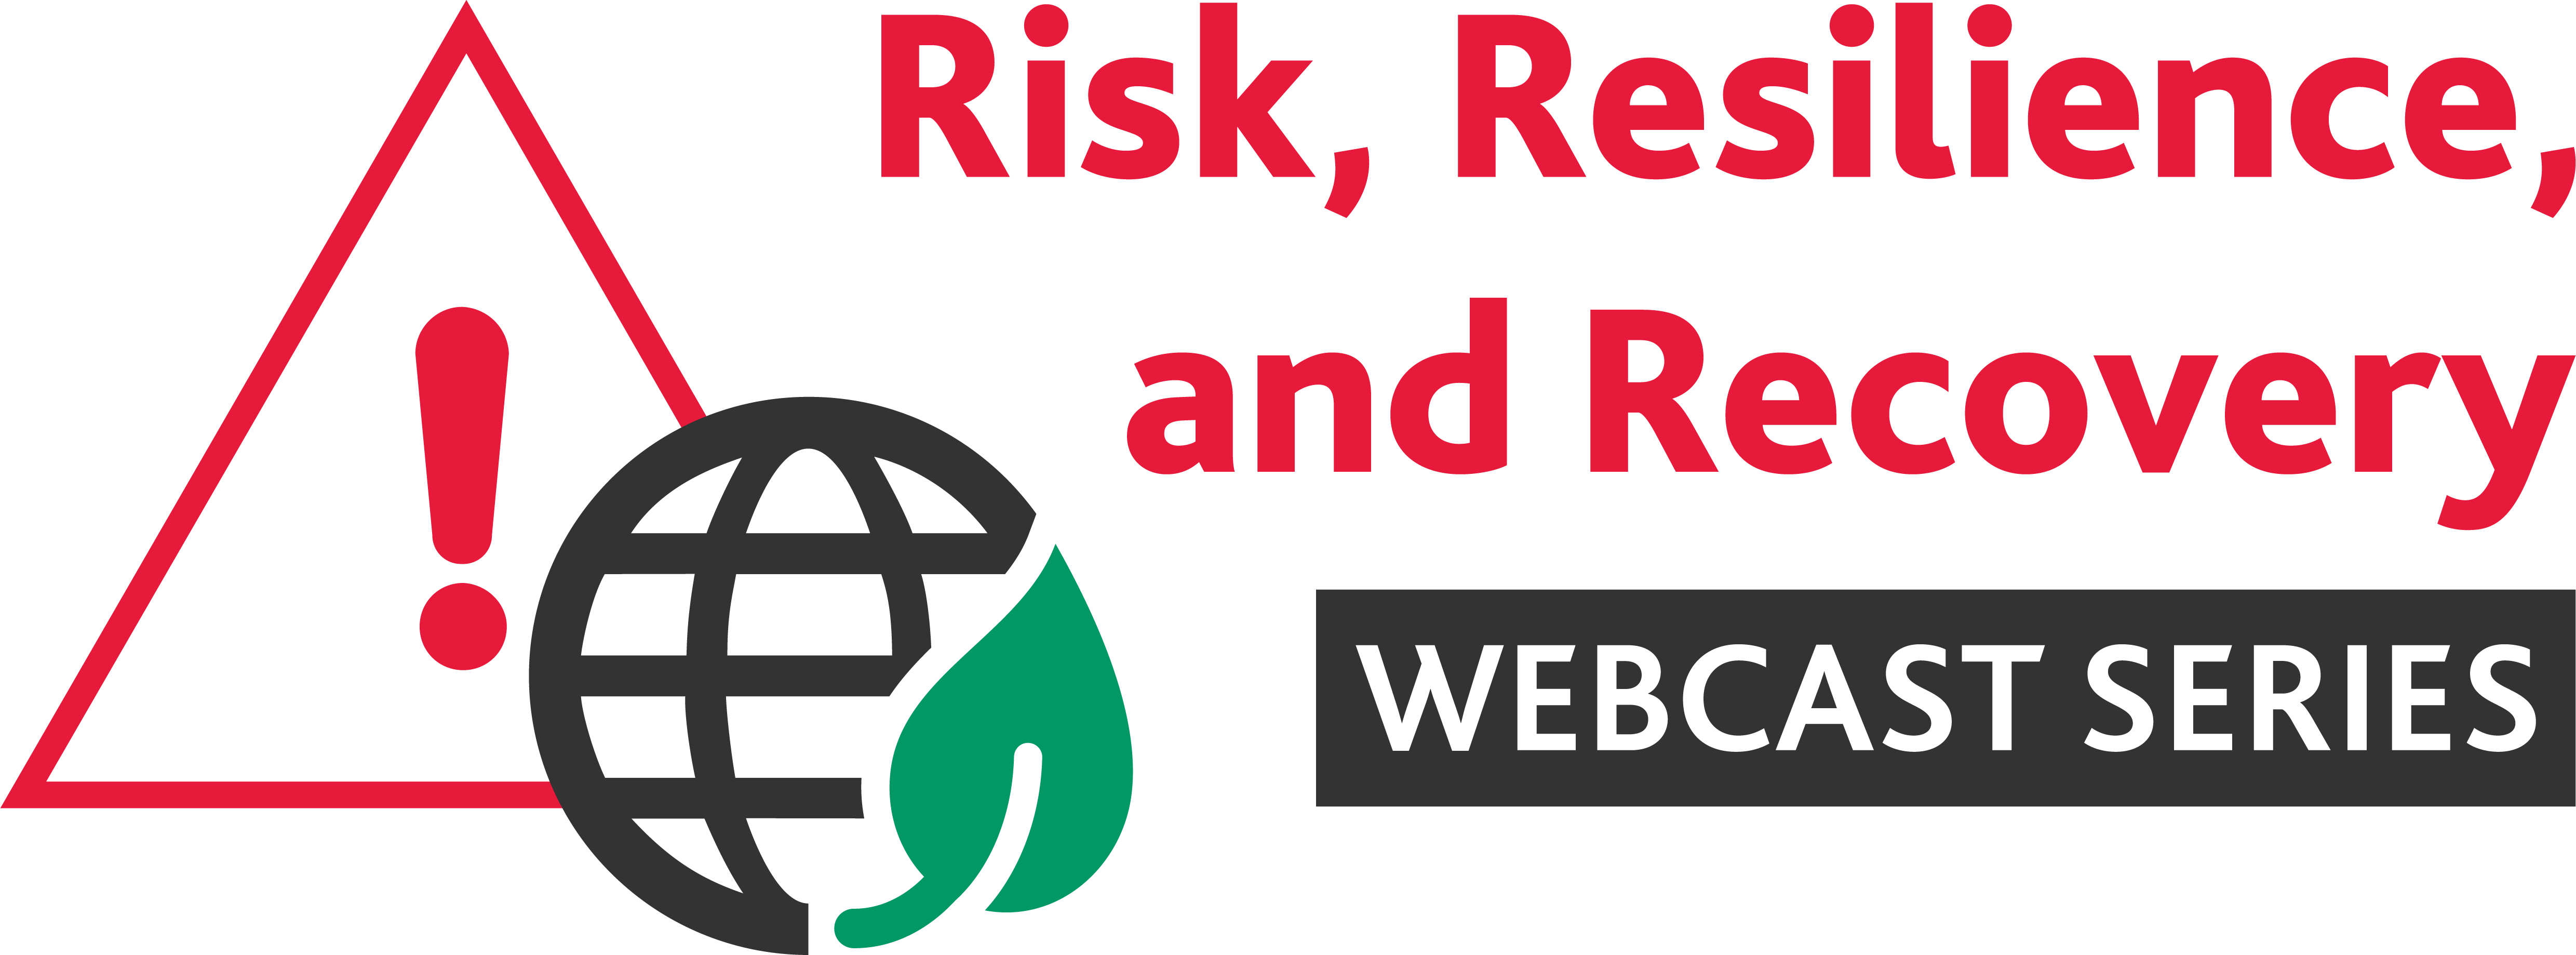 Risk, Resilience, and Recovery Webcast Series logo